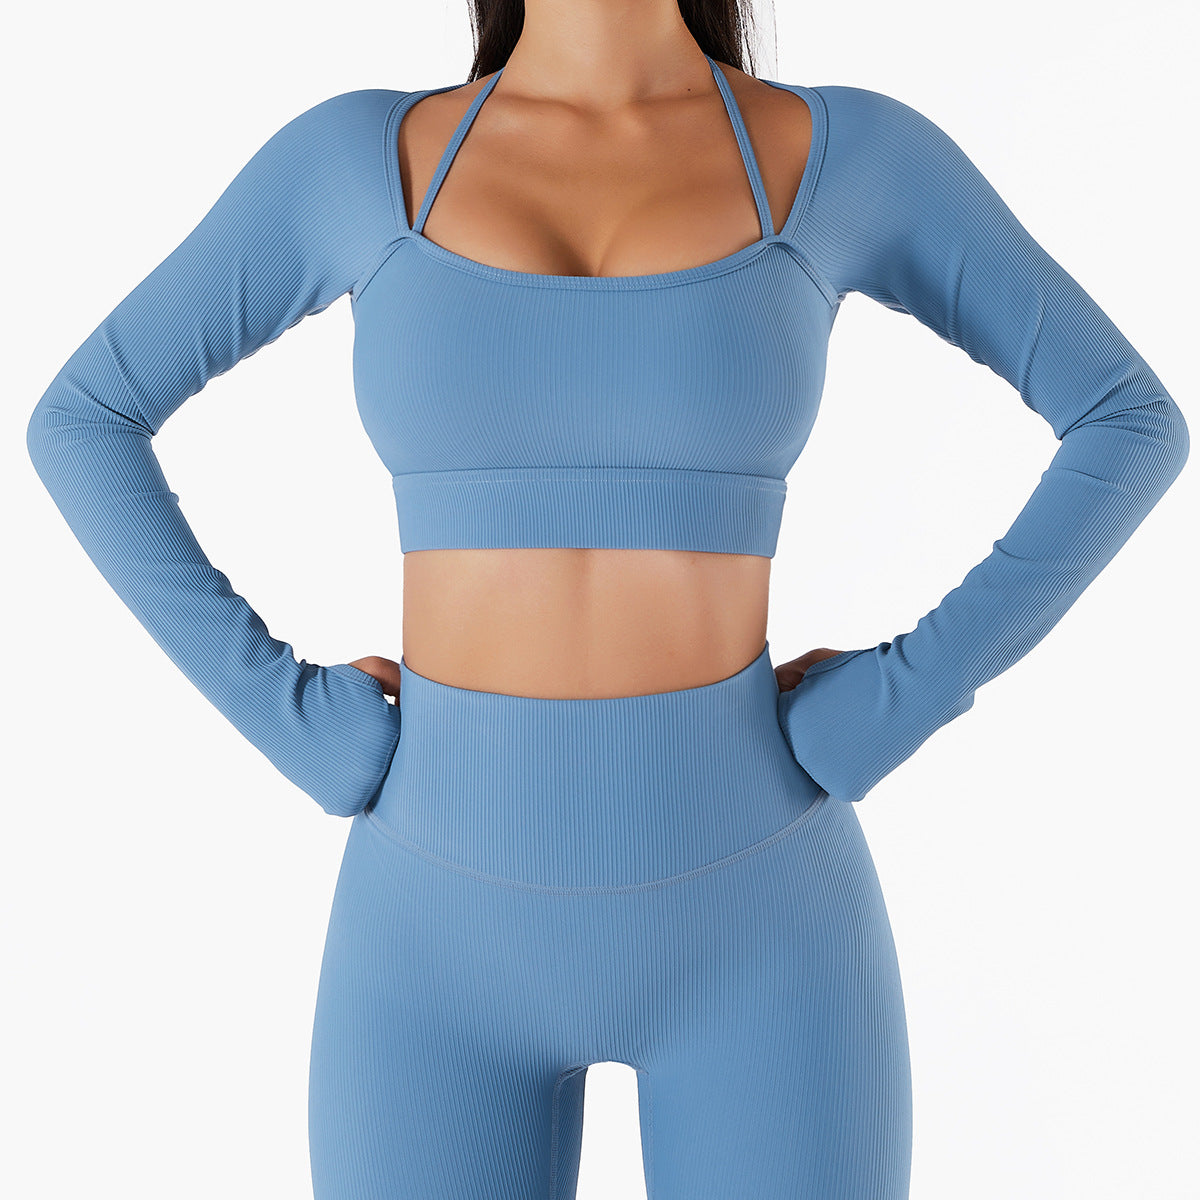 New Sports Top Women's Fast drying Bodysuit with Chest Cushion Slim Fit Long Sleeve Yoga Clothes